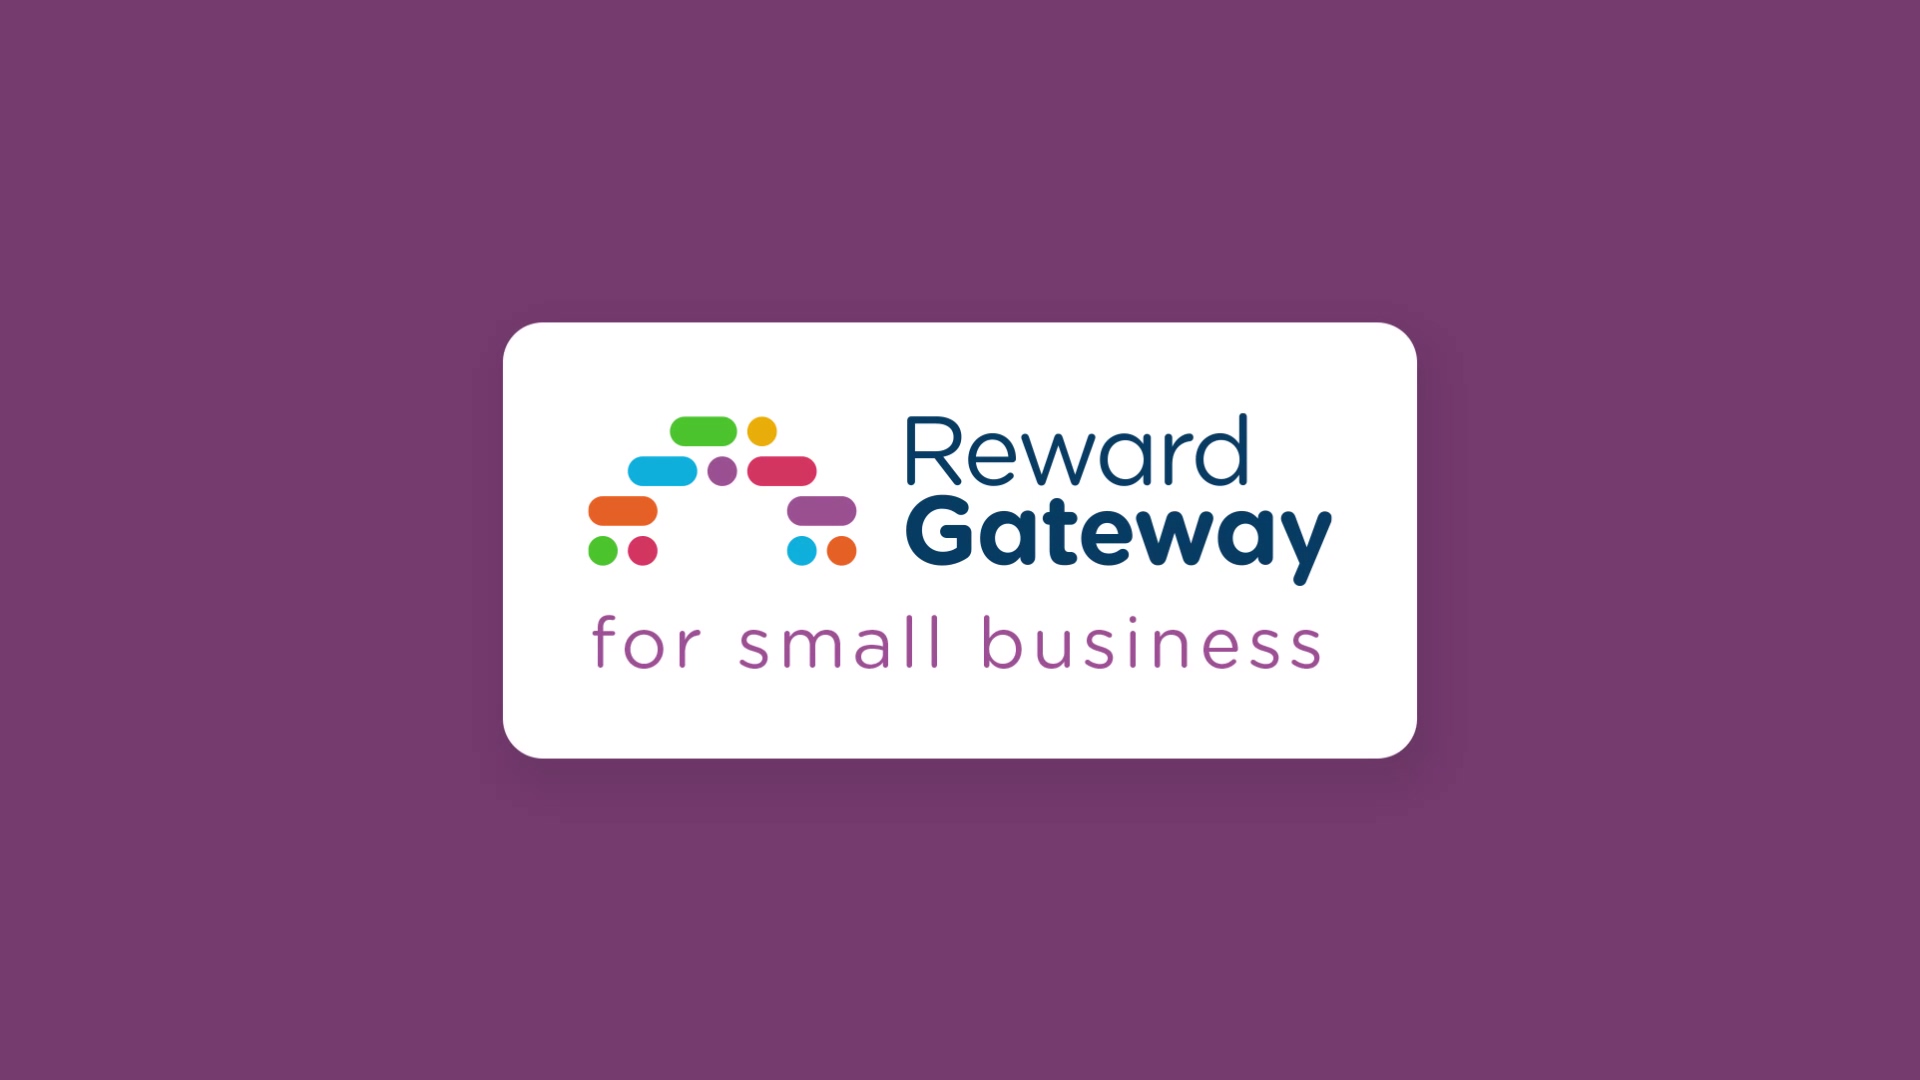 AUS_Reward_Gateway_for_Small_Business_Overview_Video-thumb